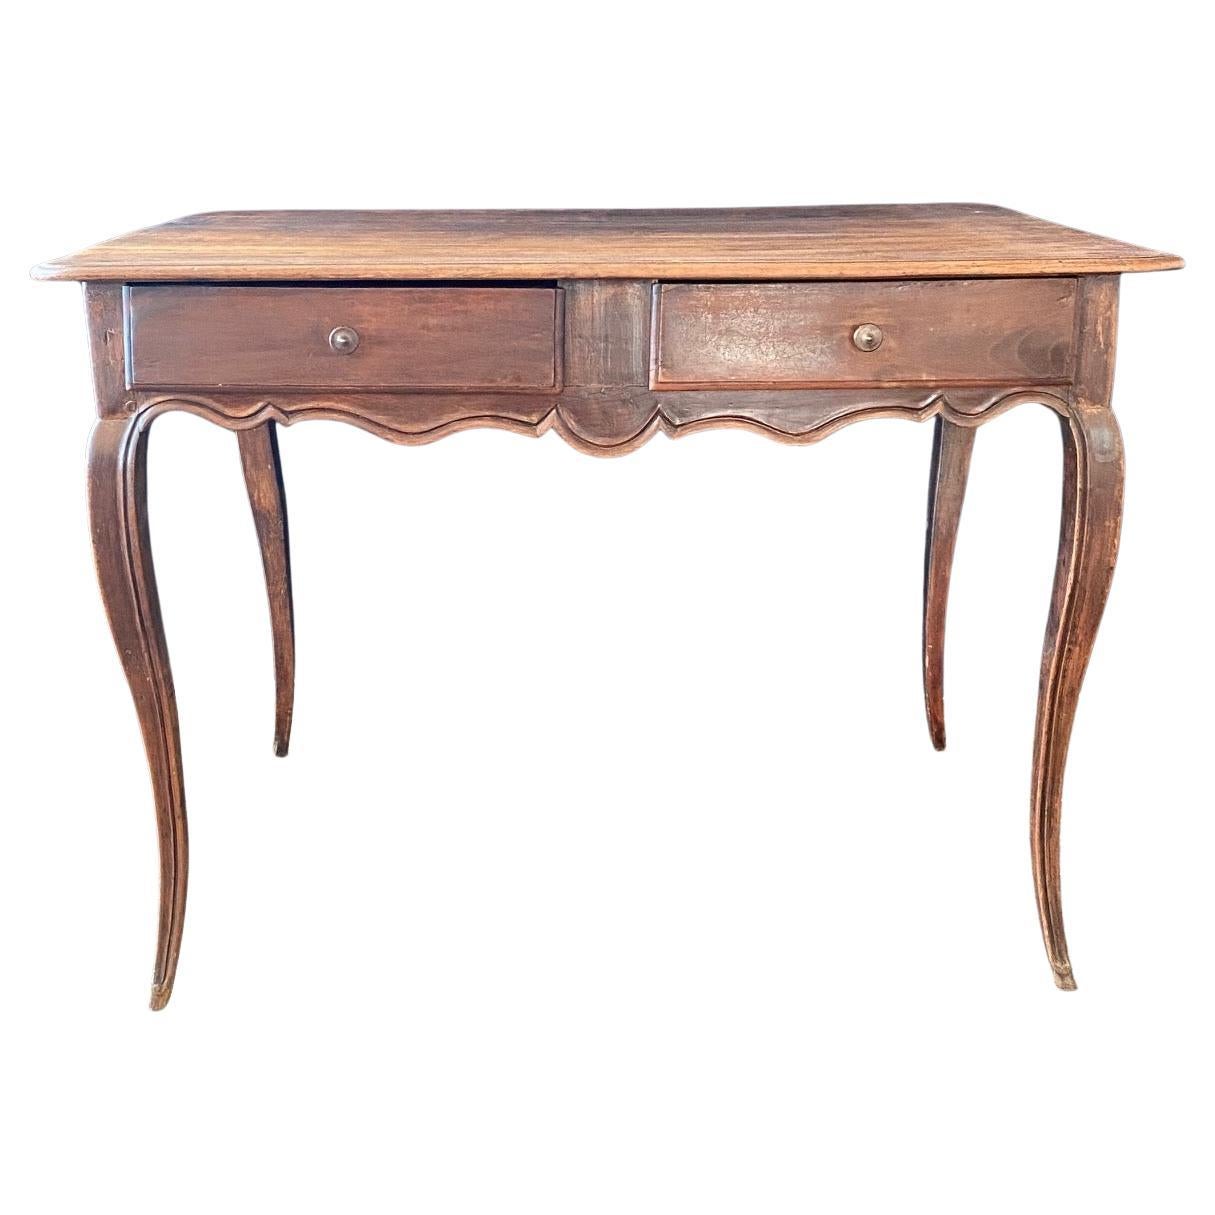 French Provincial Petite Desk or Side Table with 4 Sided Scalloped Apron 